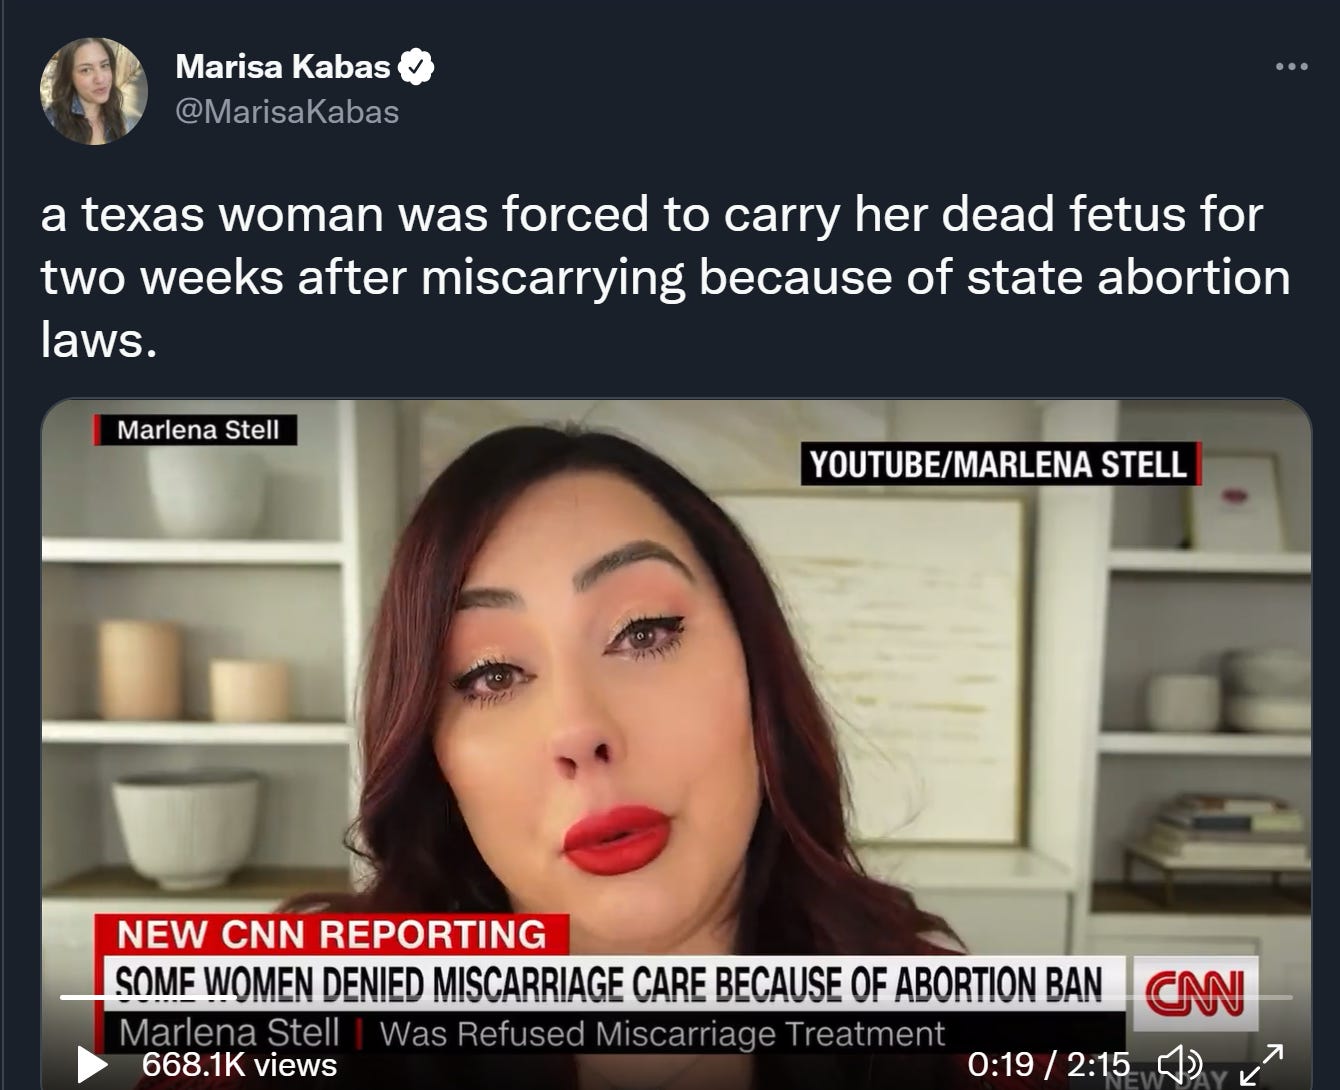 Cnn Story Of Texas Women Forced To Carry Dead Fetus Lacks Credibility